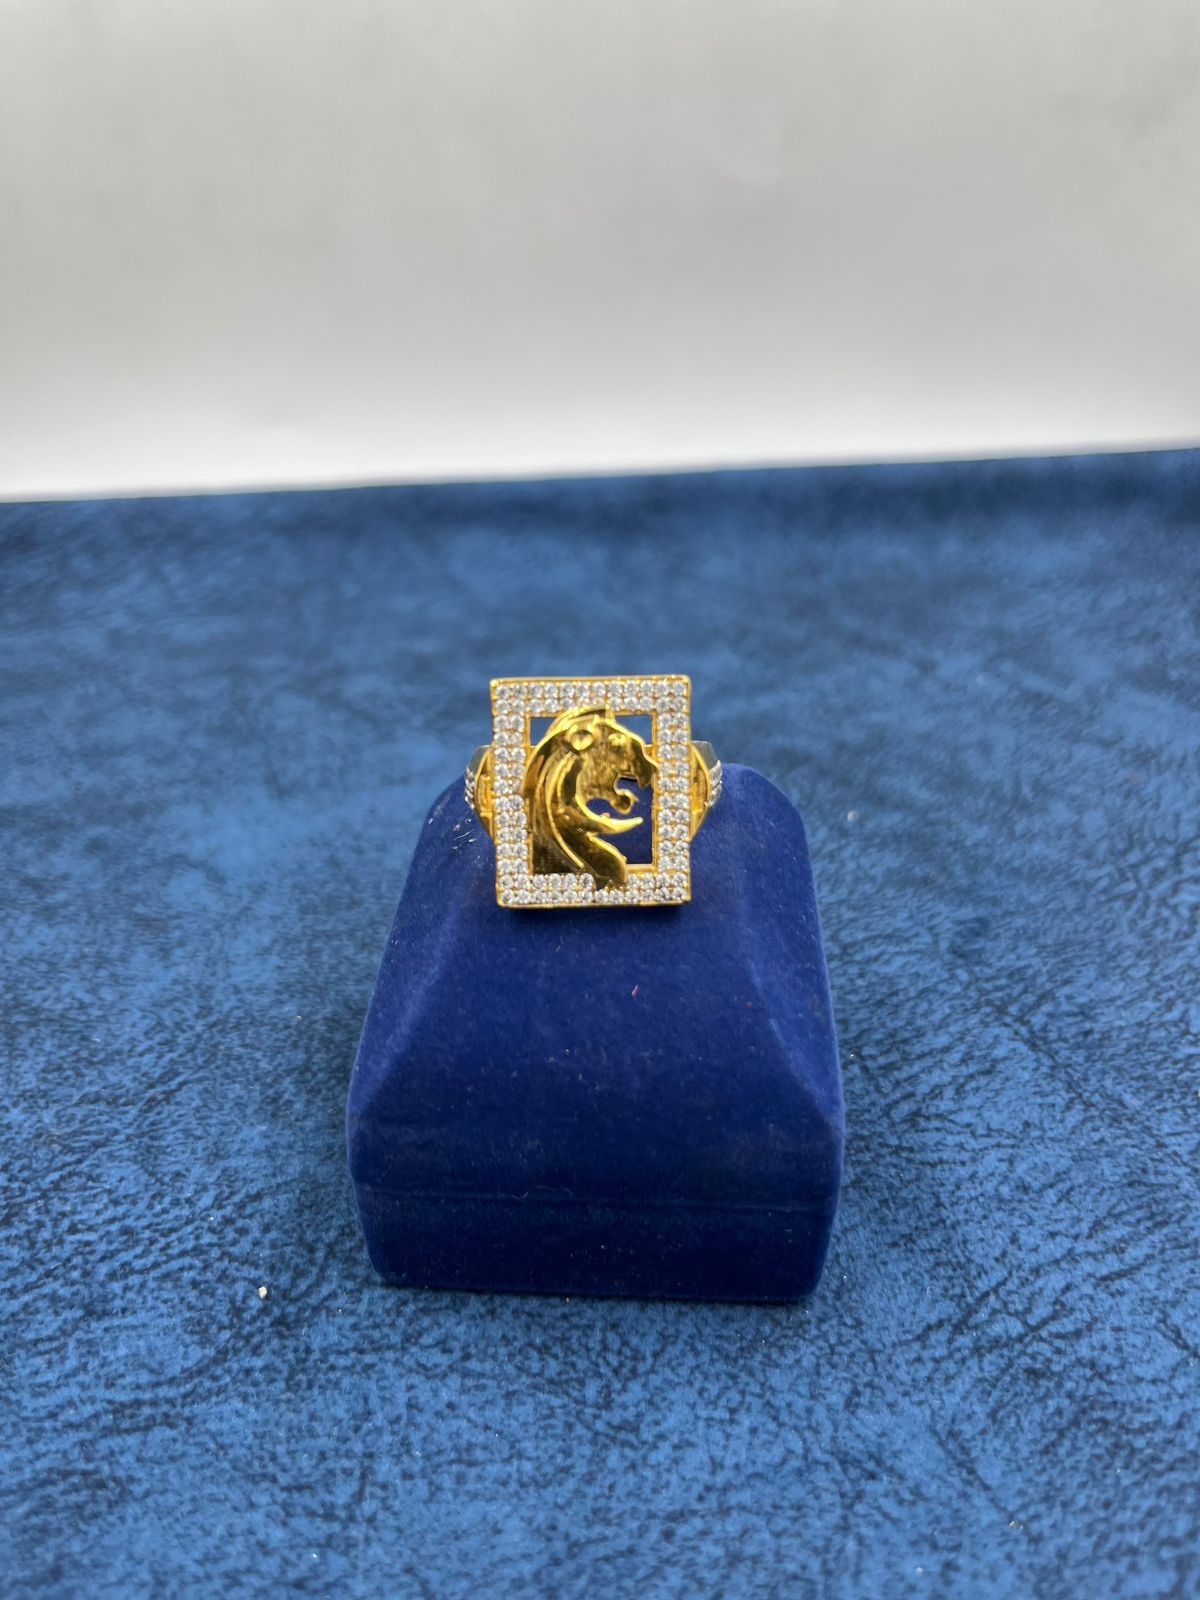 Buy SIDHARTH GEMS Lab Certified 6.25 Ratti 5.25 Carat Tiger Eye/Tiger Stone  Ring in Gold Plated Ring Panchdhatu Men's and Women's at Amazon.in